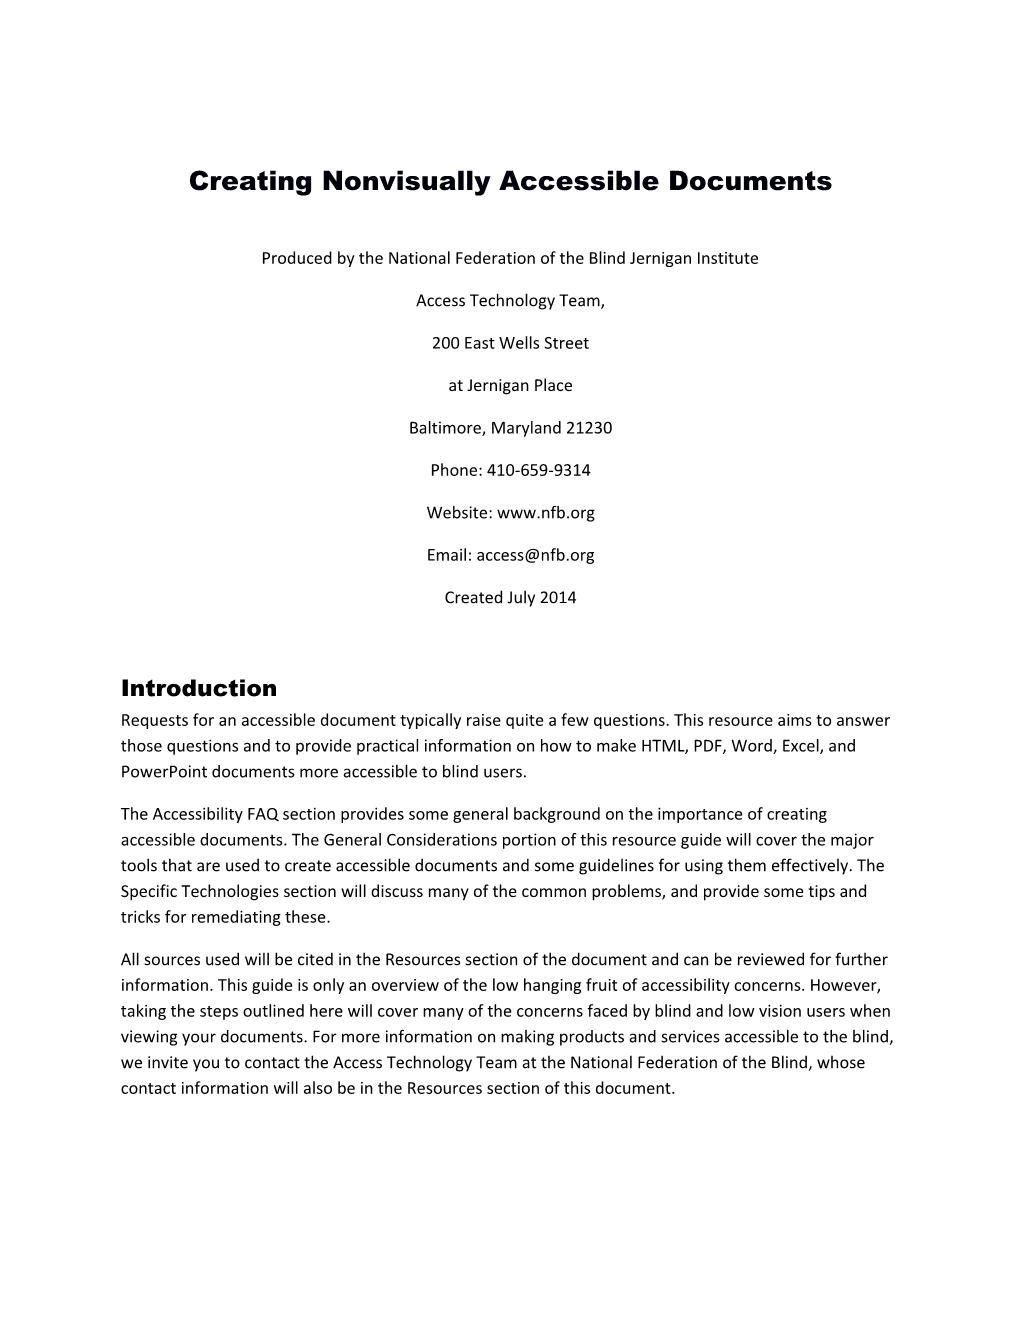 Creating Nonvisually Accessible Documents